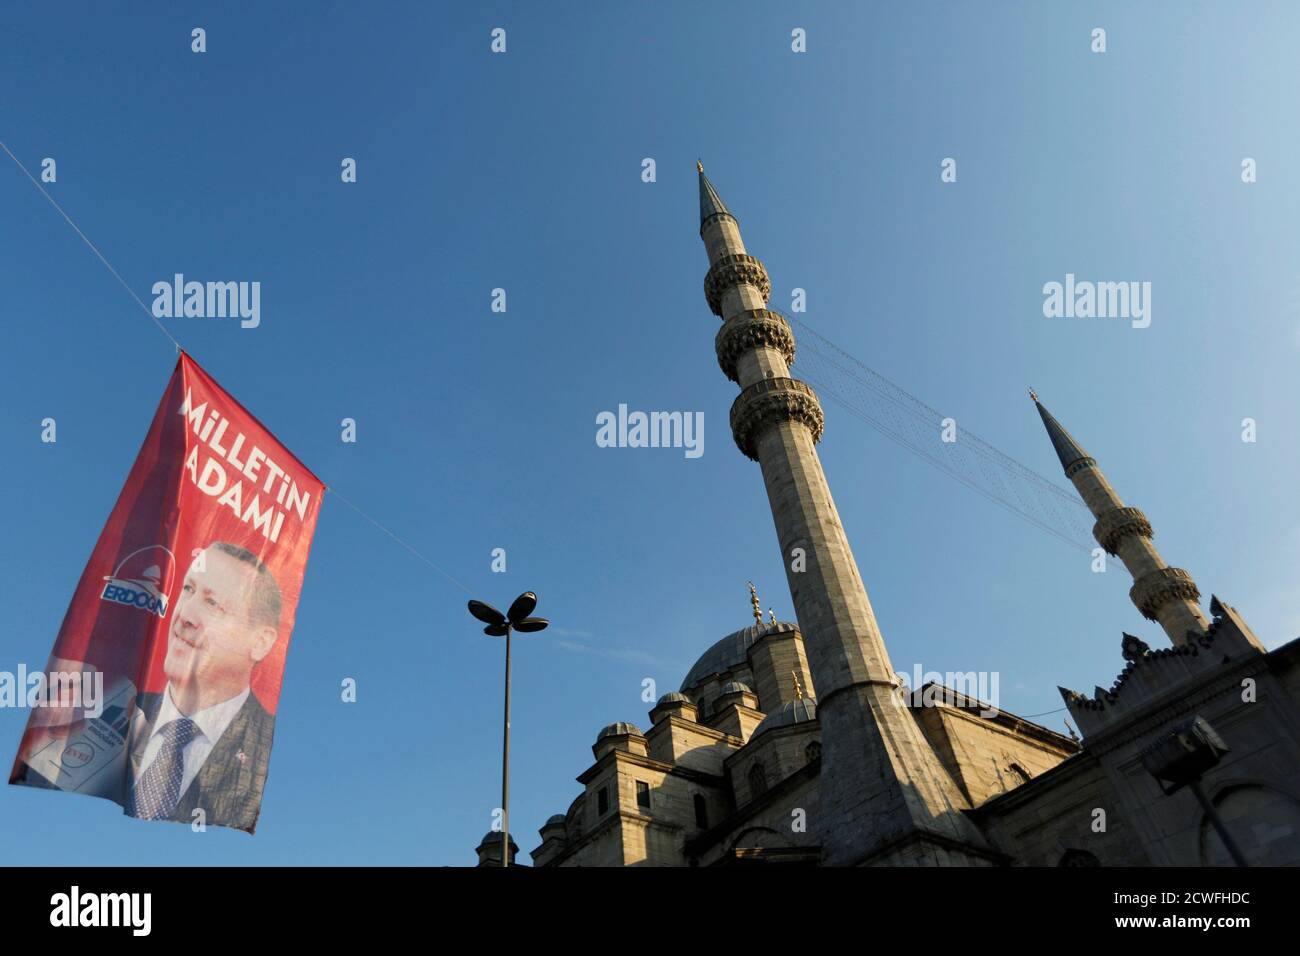 An election campaign banner of Turkey's Prime Minister and presidential candidate Tayyip Erdogan is seen near a mosque in Istanbul August 9, 2014. Erdogan is set to secure his place in history as Turkey's first popularly-elected president on Sunday, but his tightening grip on power has polarised the nation, worried Western allies and raised fears of creeping authoritarianism. REUTERS/Murad Sezer (TURKEY  - Tags: POLITICS ELECTIONS) Stock Photo